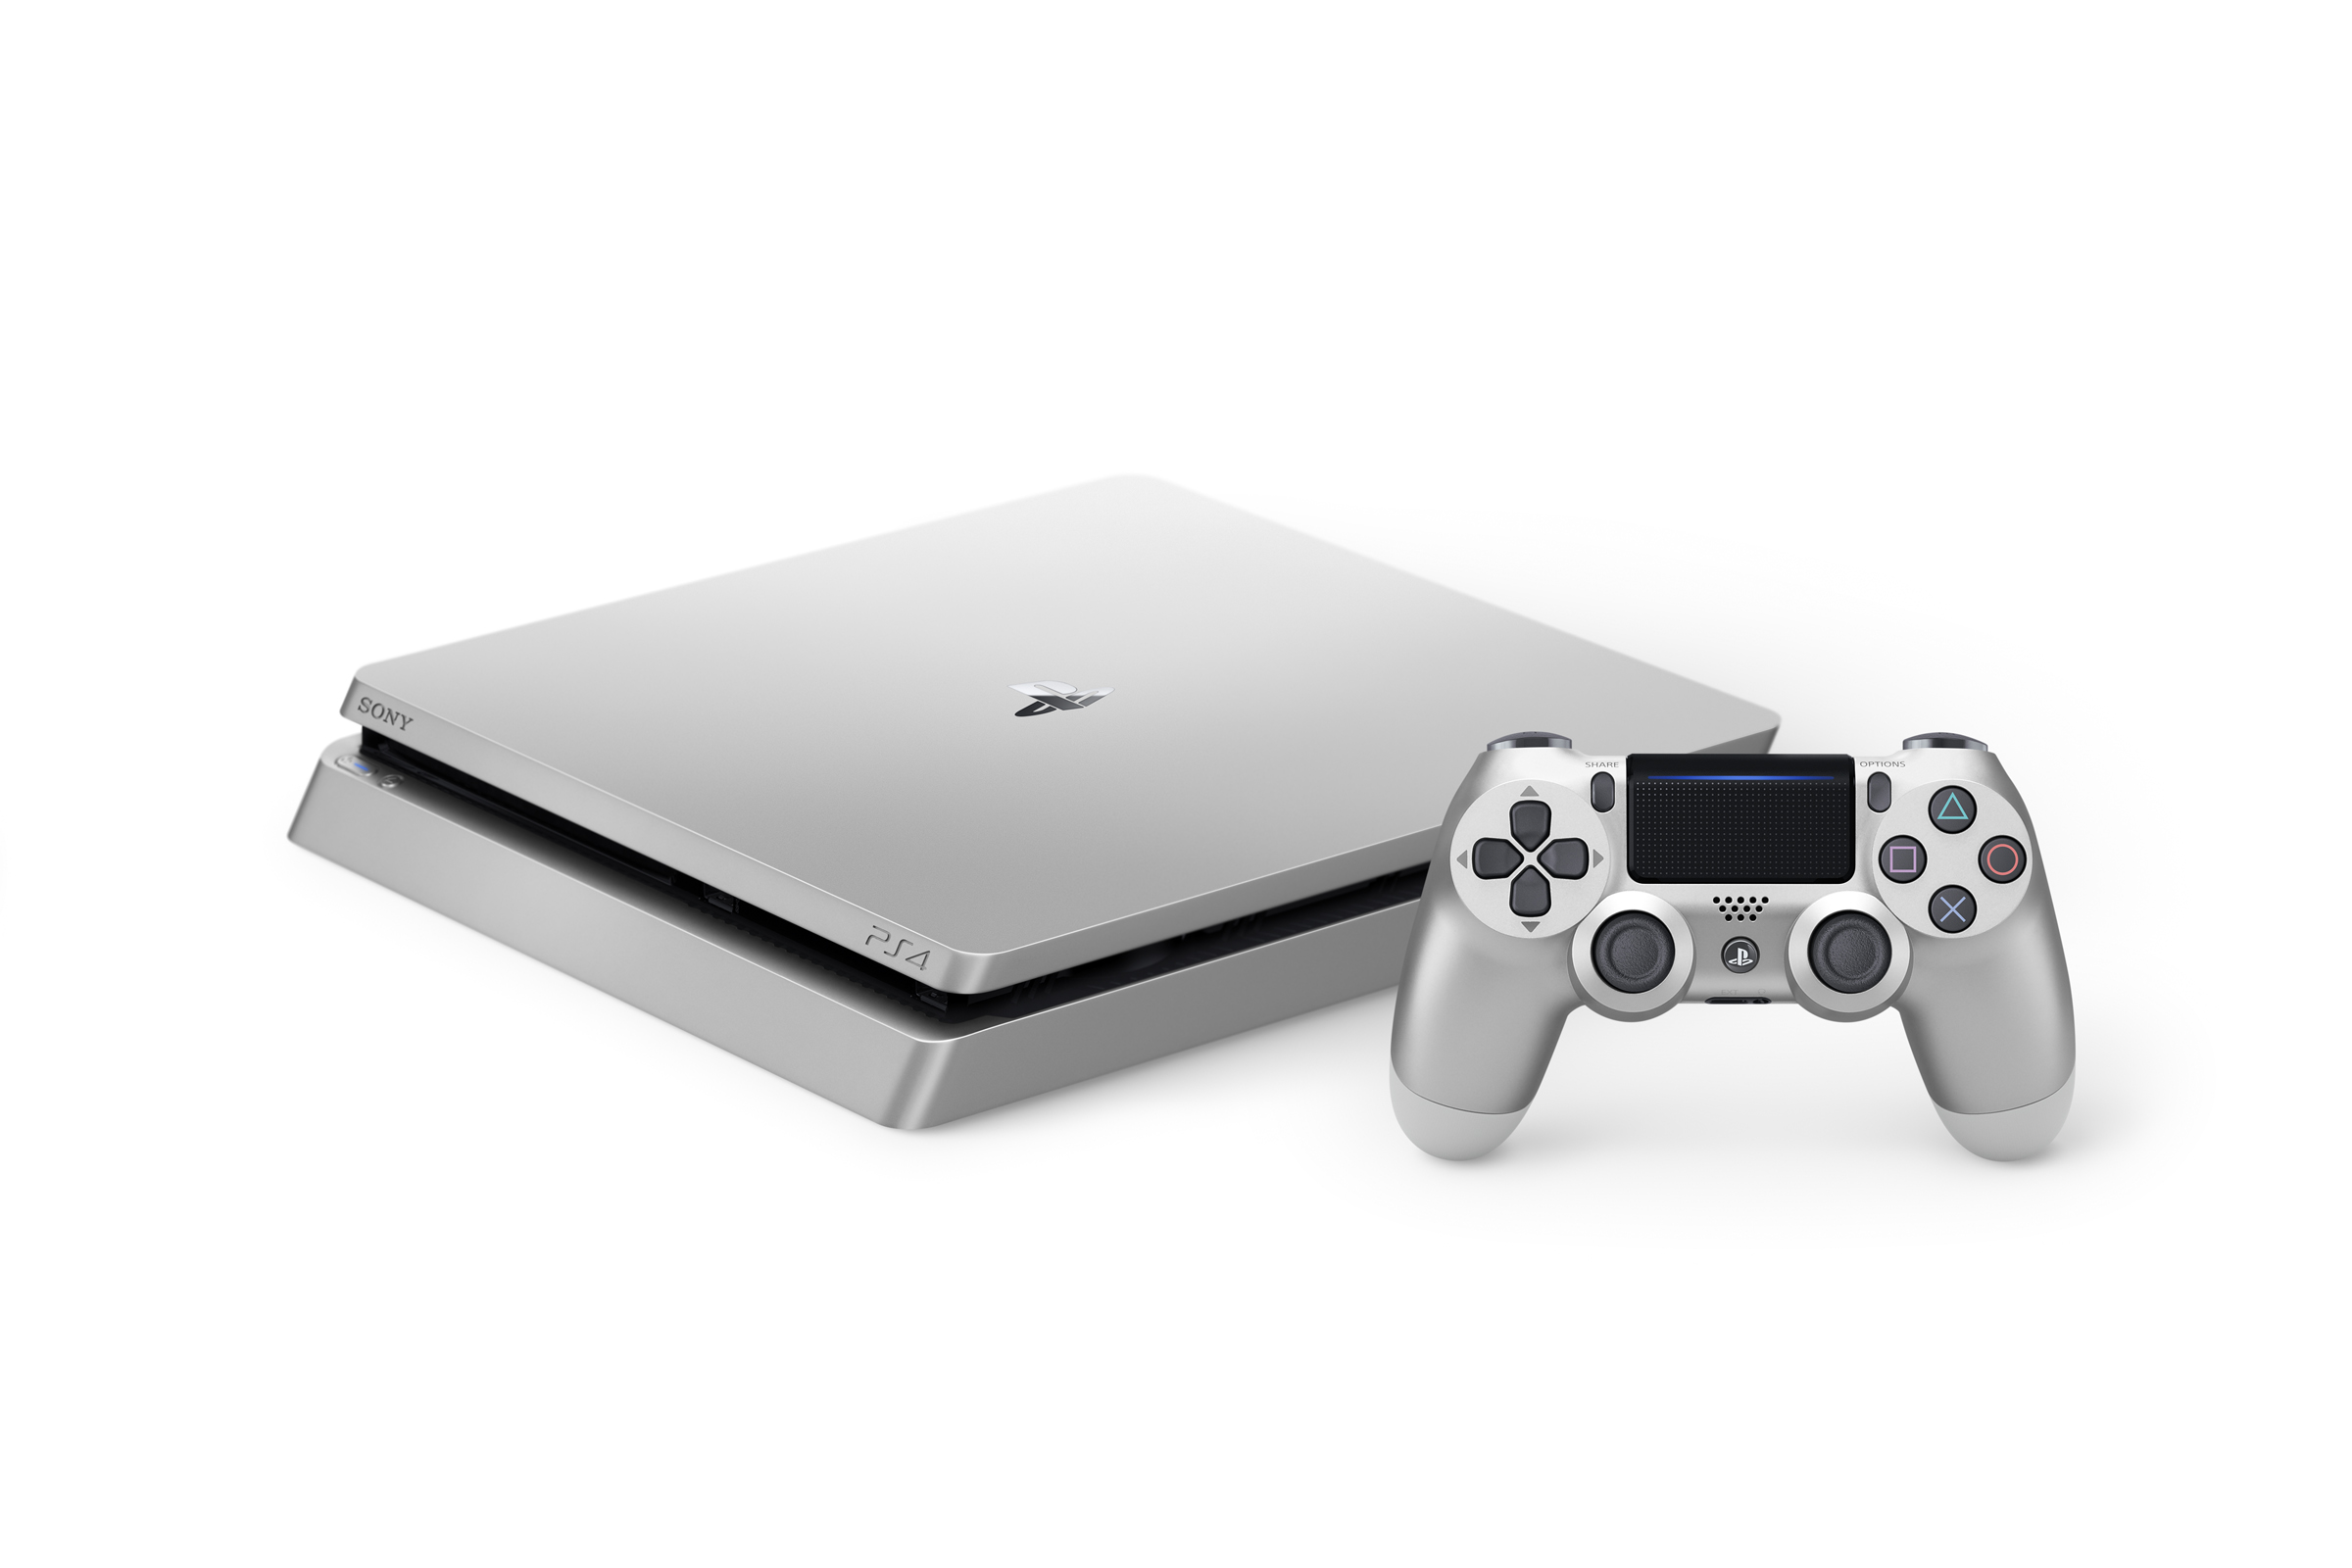 Sony Playstation 4: More than 60 million sold